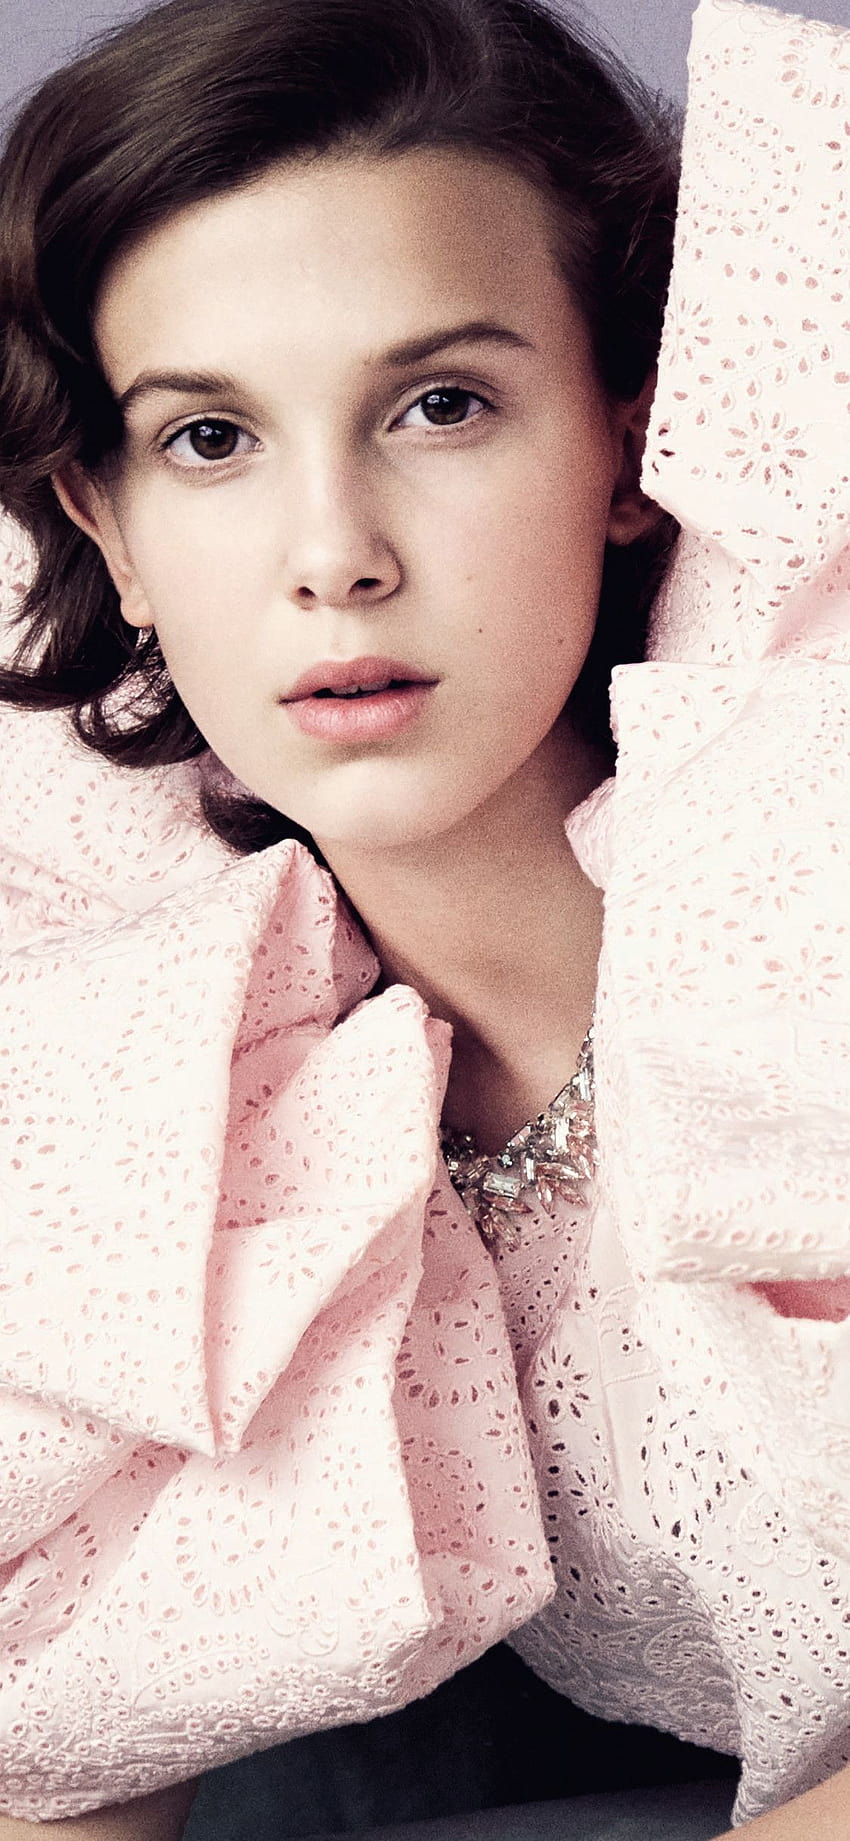 1125x2436 Millie Bobby Brown Vogue 2018 Iphone XS, Iphone 10, Iphone, millie bobby brown iphone Fond d'écran de téléphone HD